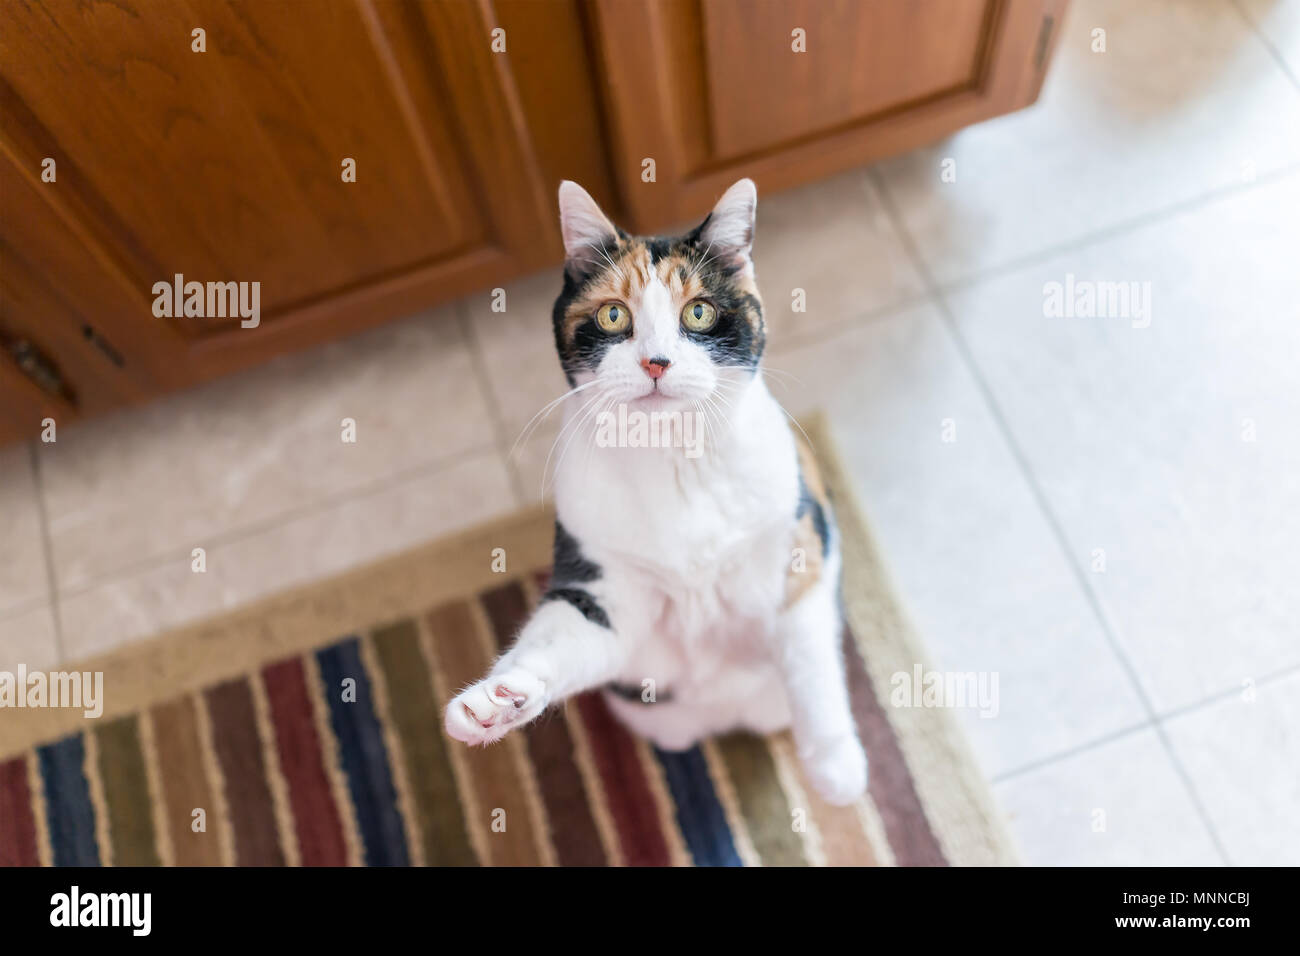 Calico cat standing up on hind legs begging for treat, one paw up, adorable cute big eyes asking for food in kitchen floor by cabinets, doing trick Stock Photo